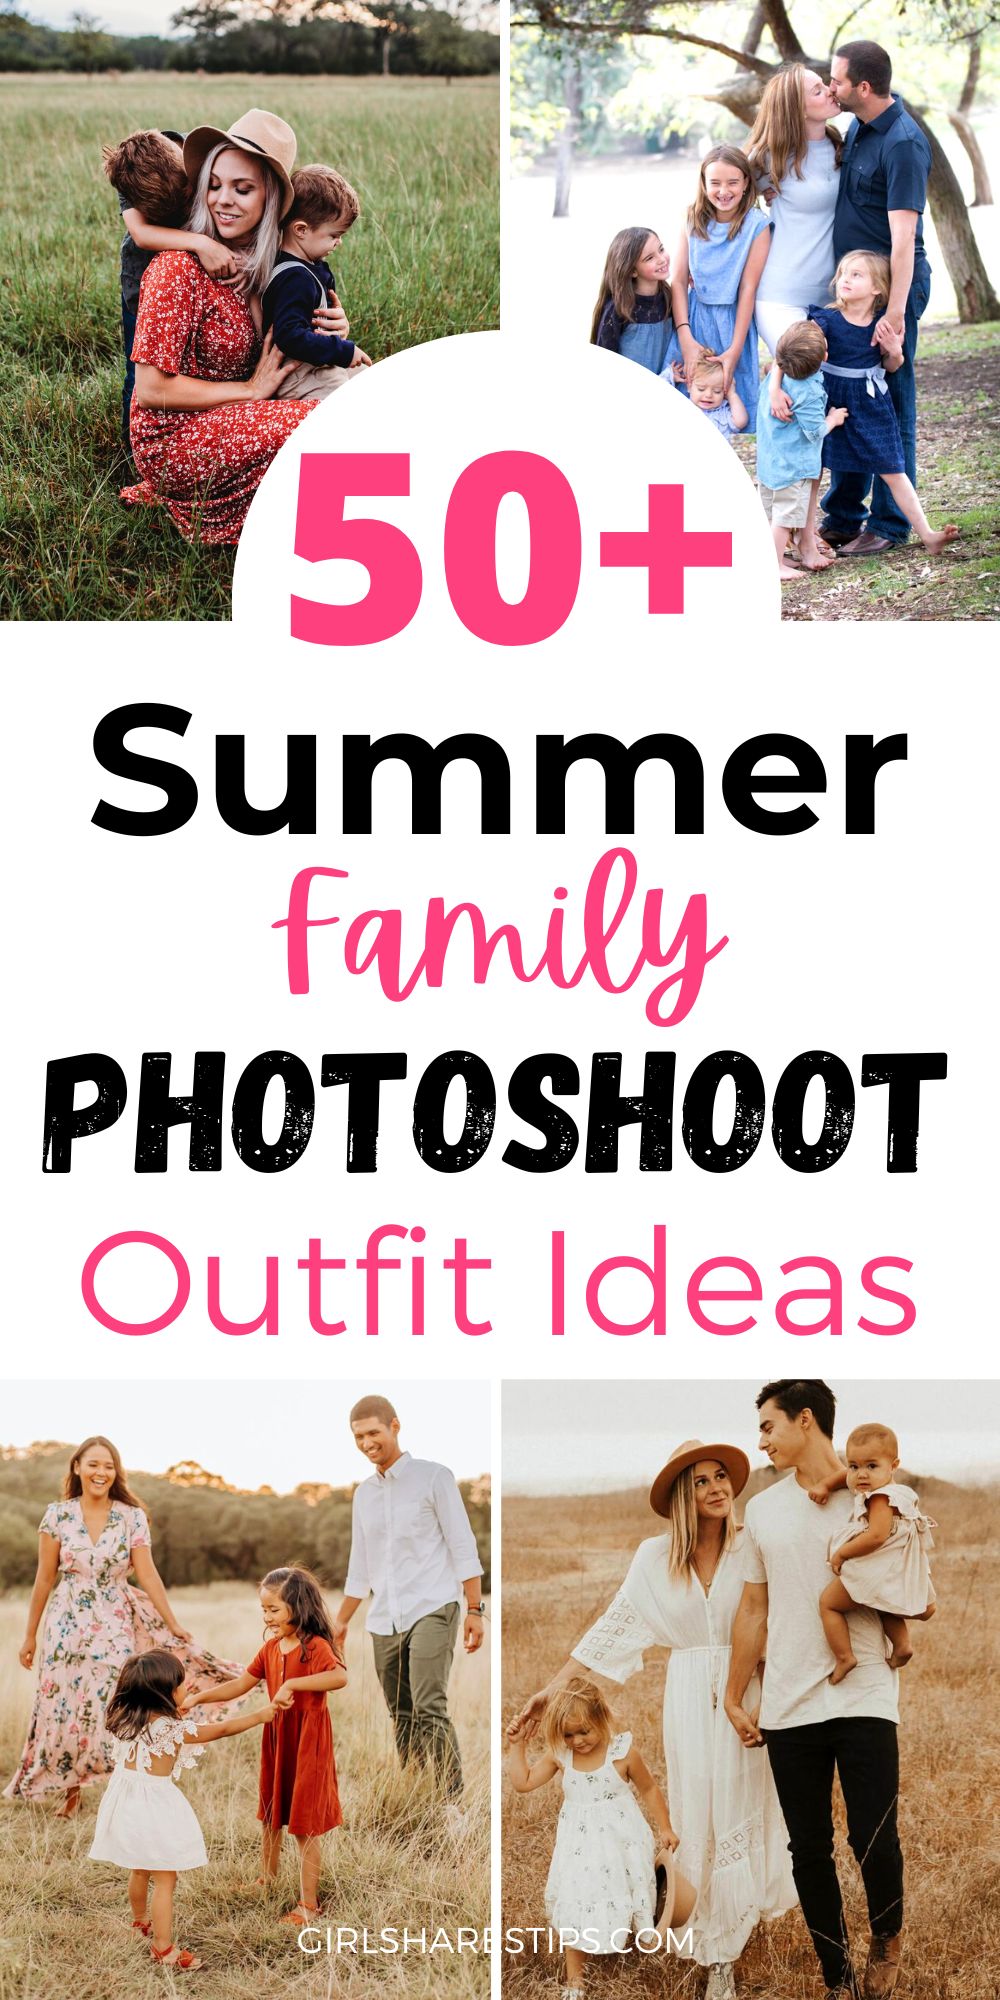 summer family photoshoot outfits ideas collage